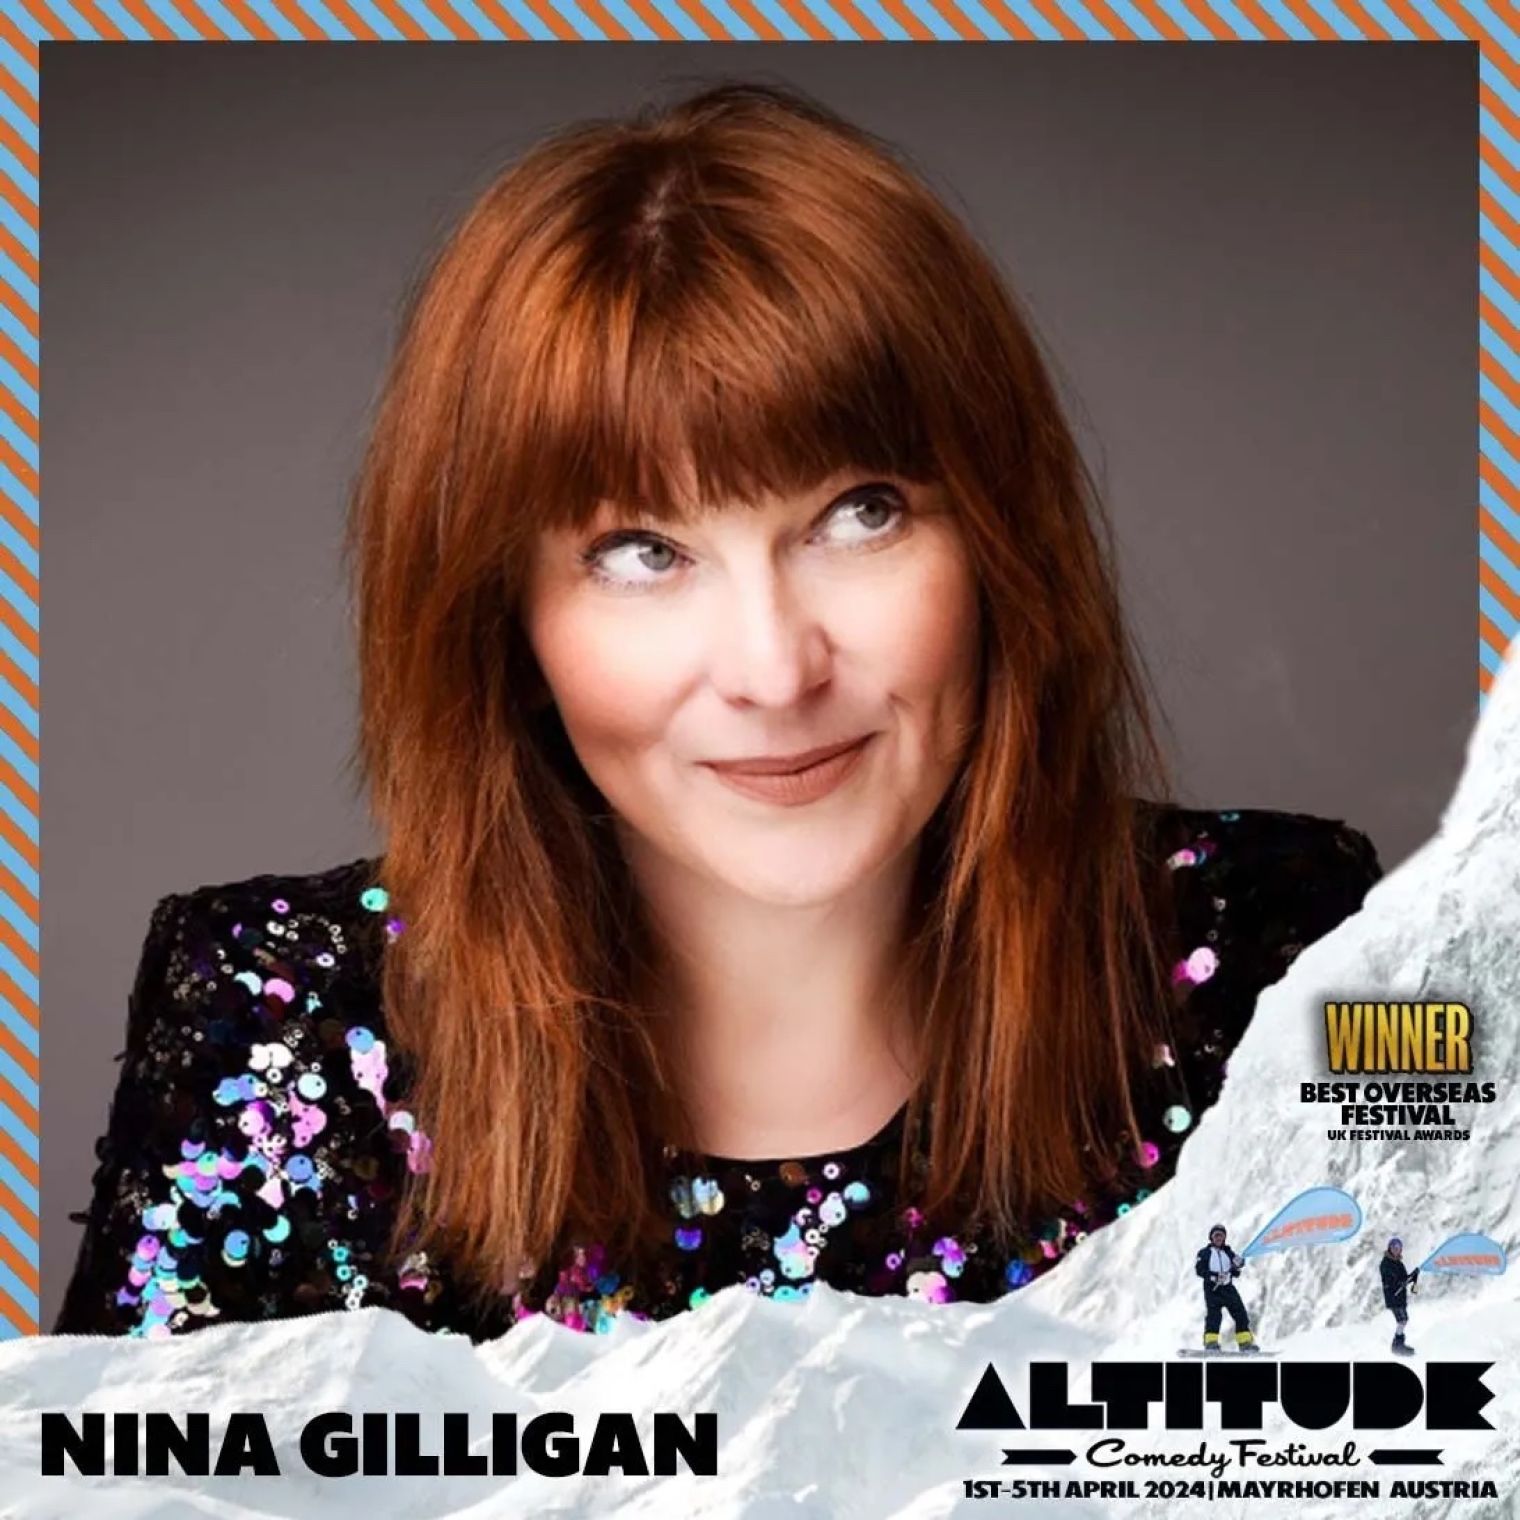 Nina Gilligan is performing at this week's Altitude Comedy Festival which takes place in the Austrian Alps